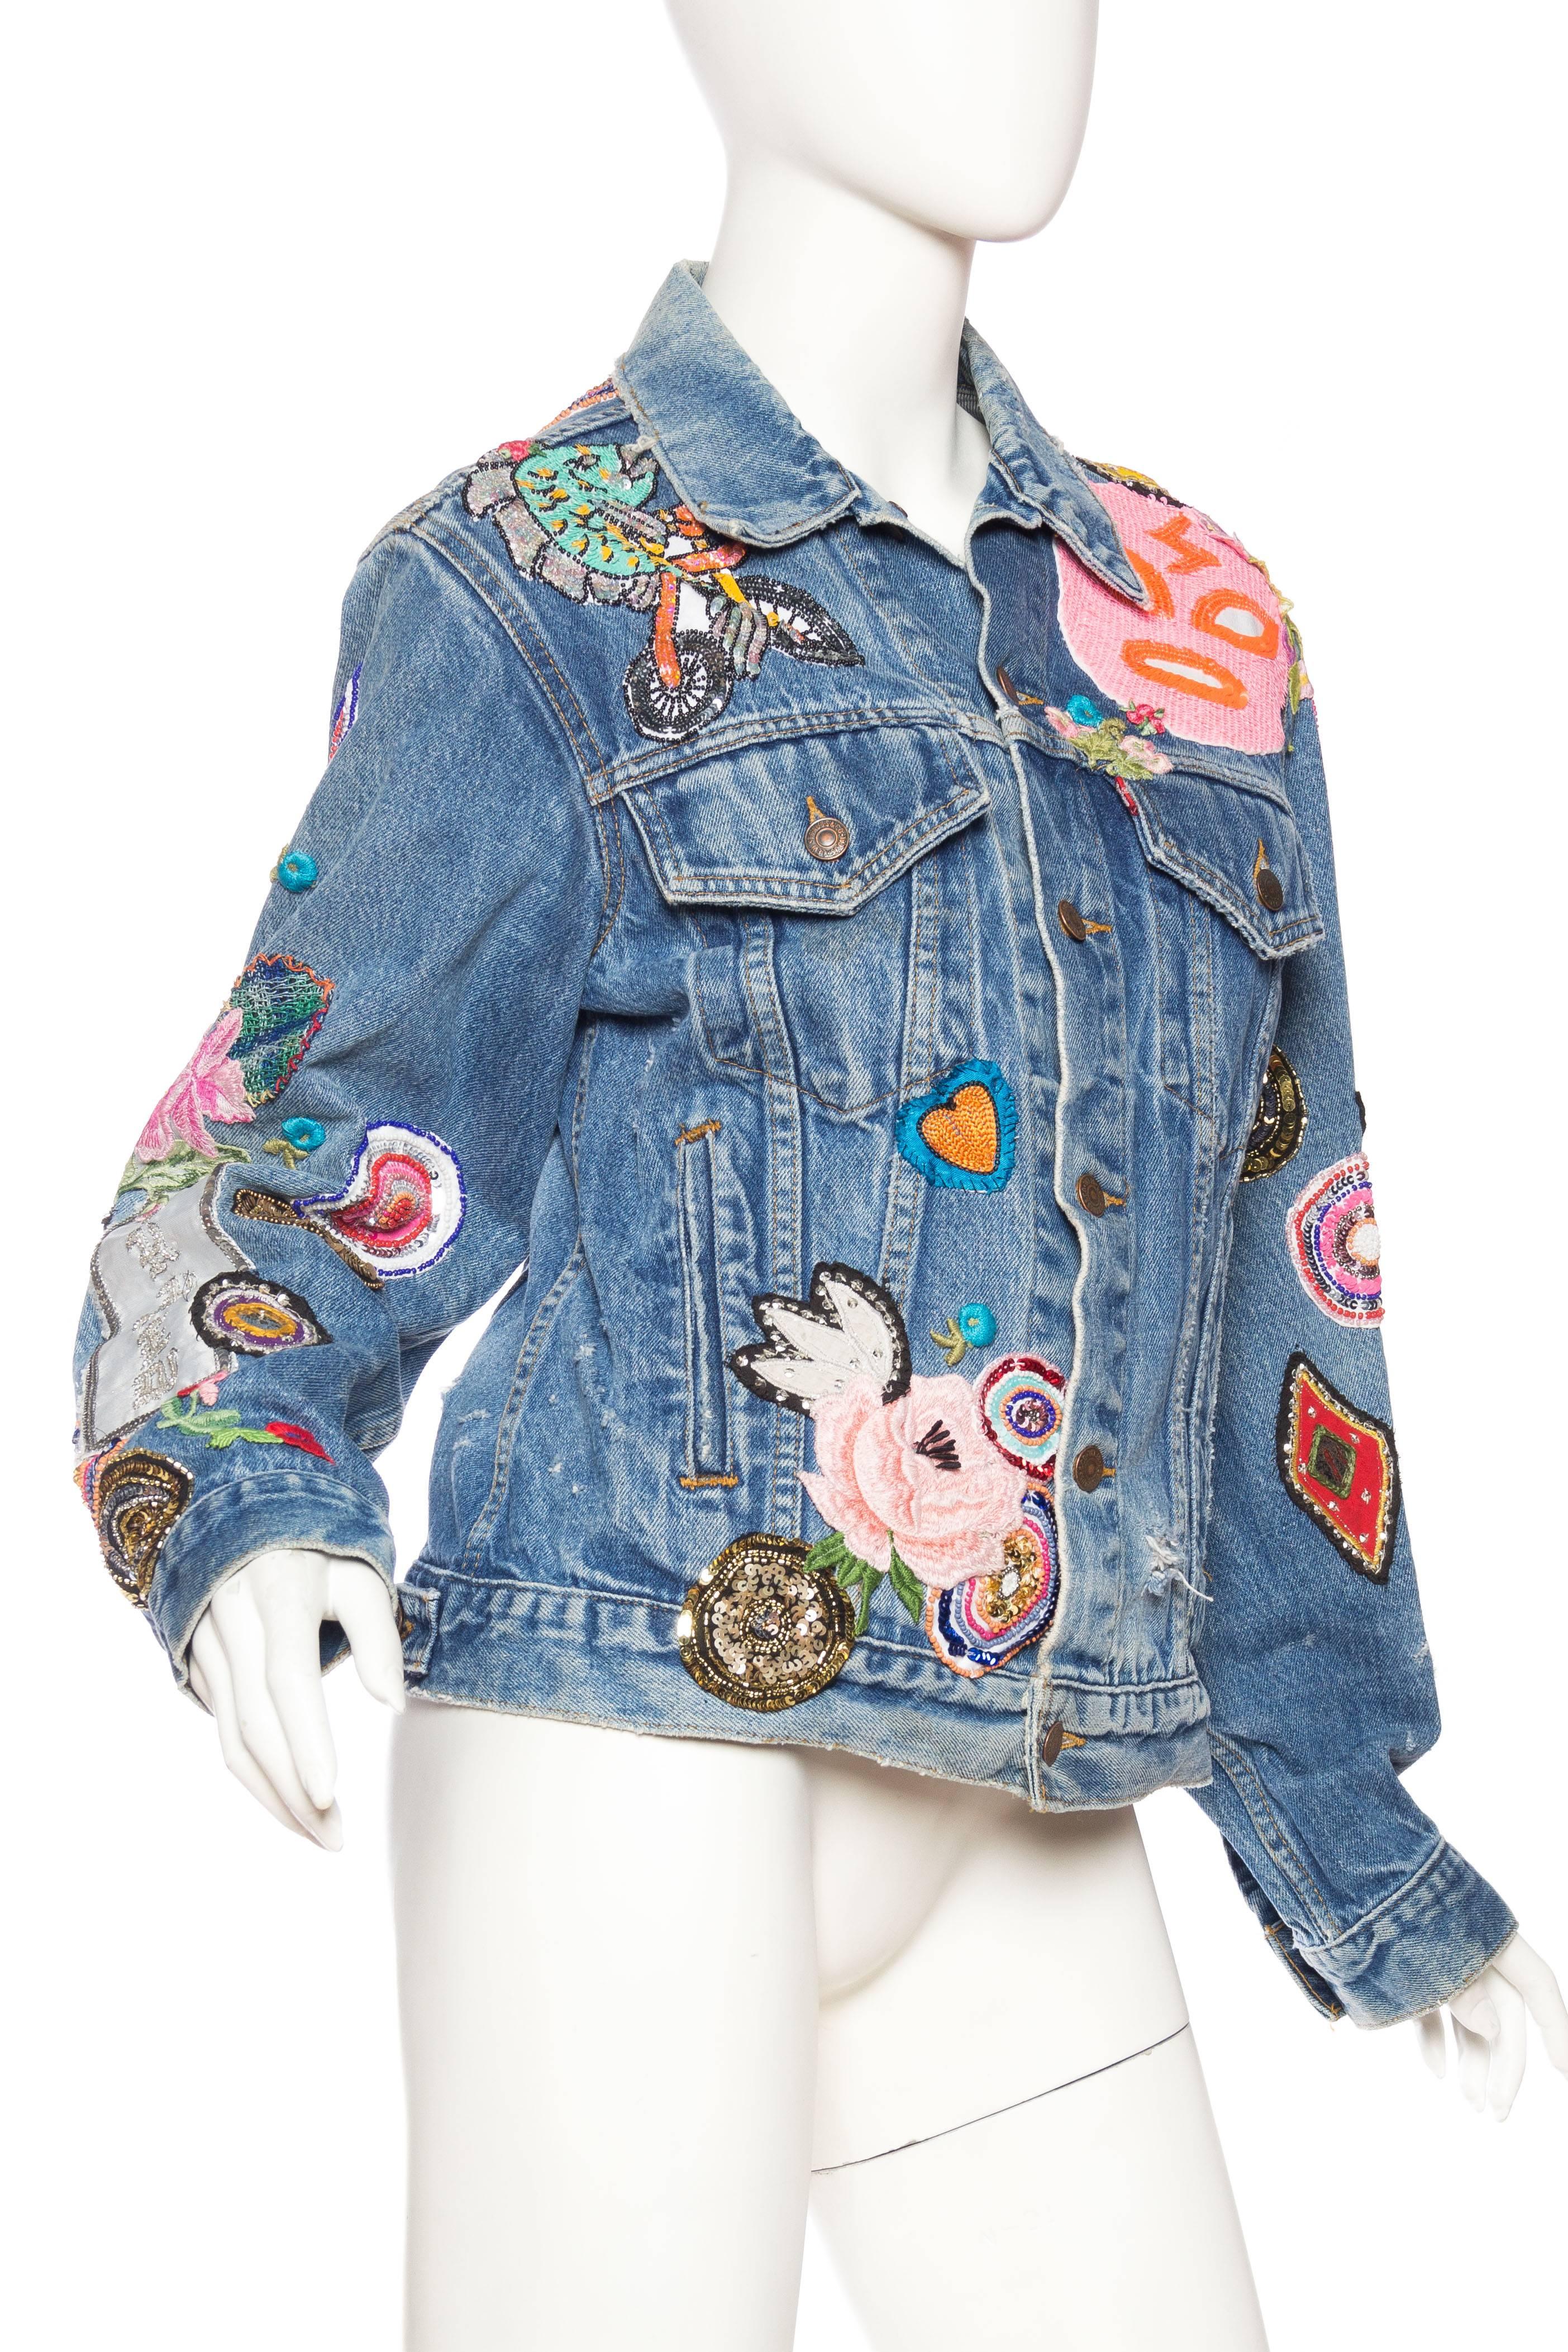 Kara Ross Unleashed X Morphew Graffiti Embellished Levis Jacket  In Excellent Condition In New York, NY